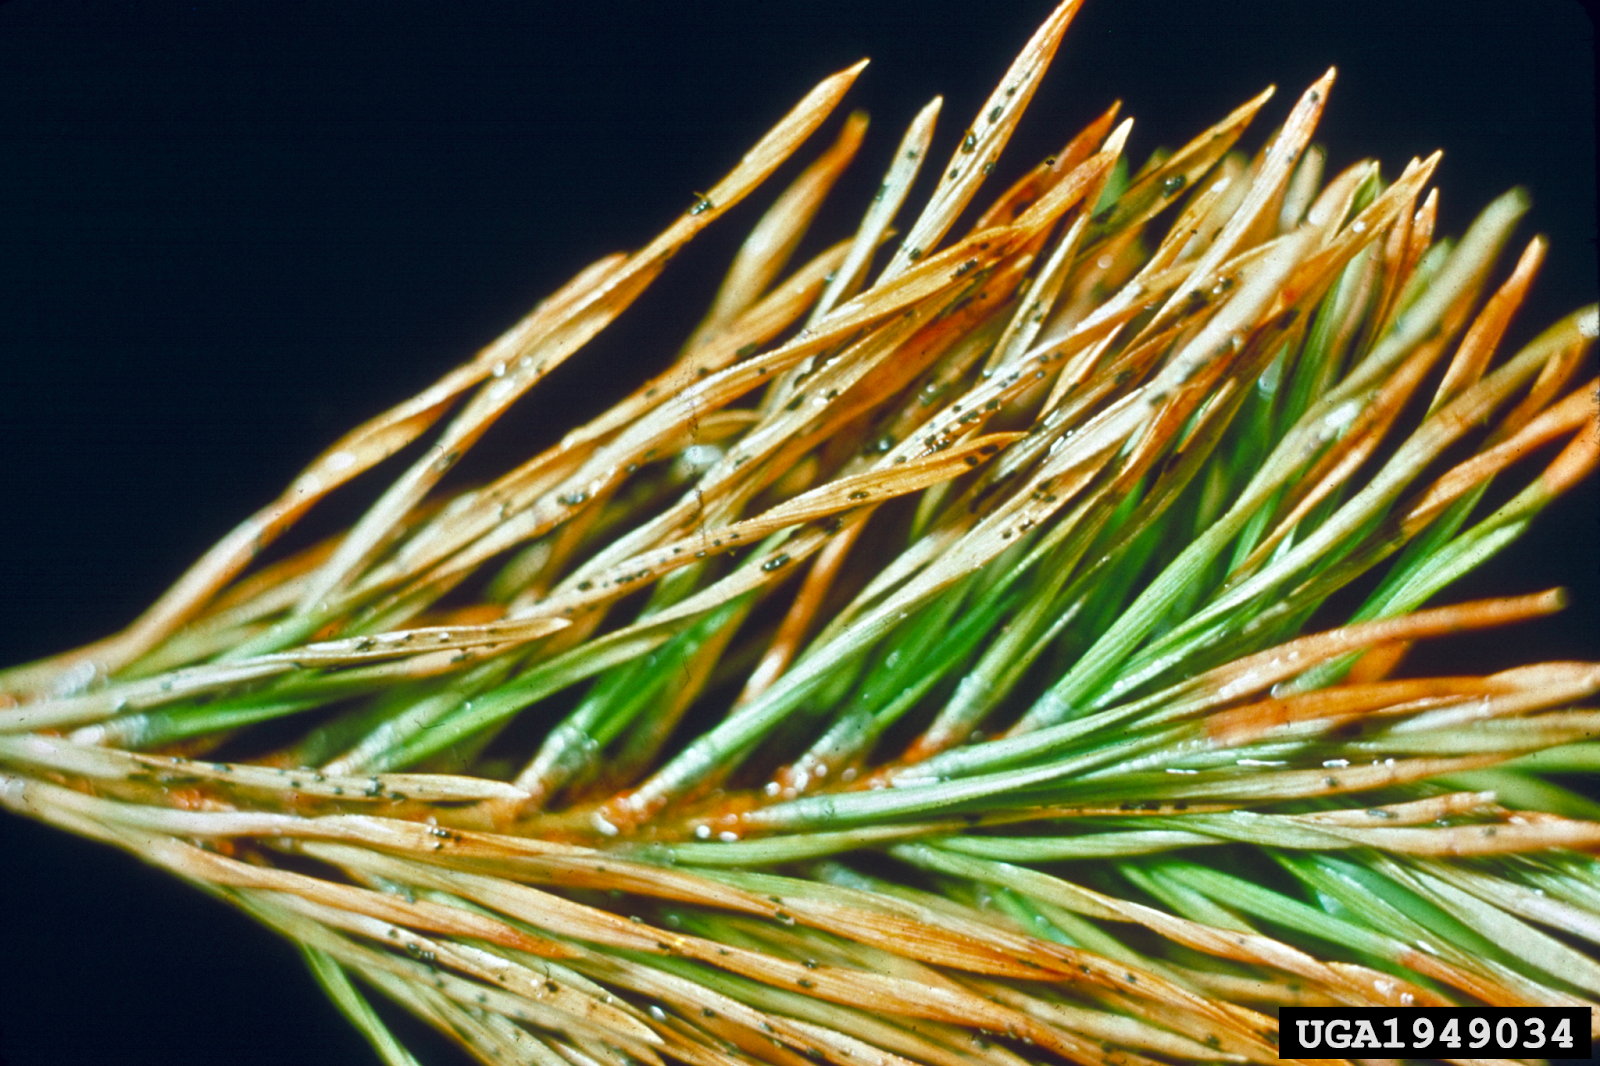 pine needles that turn to brown along the tips with small growths along the needles